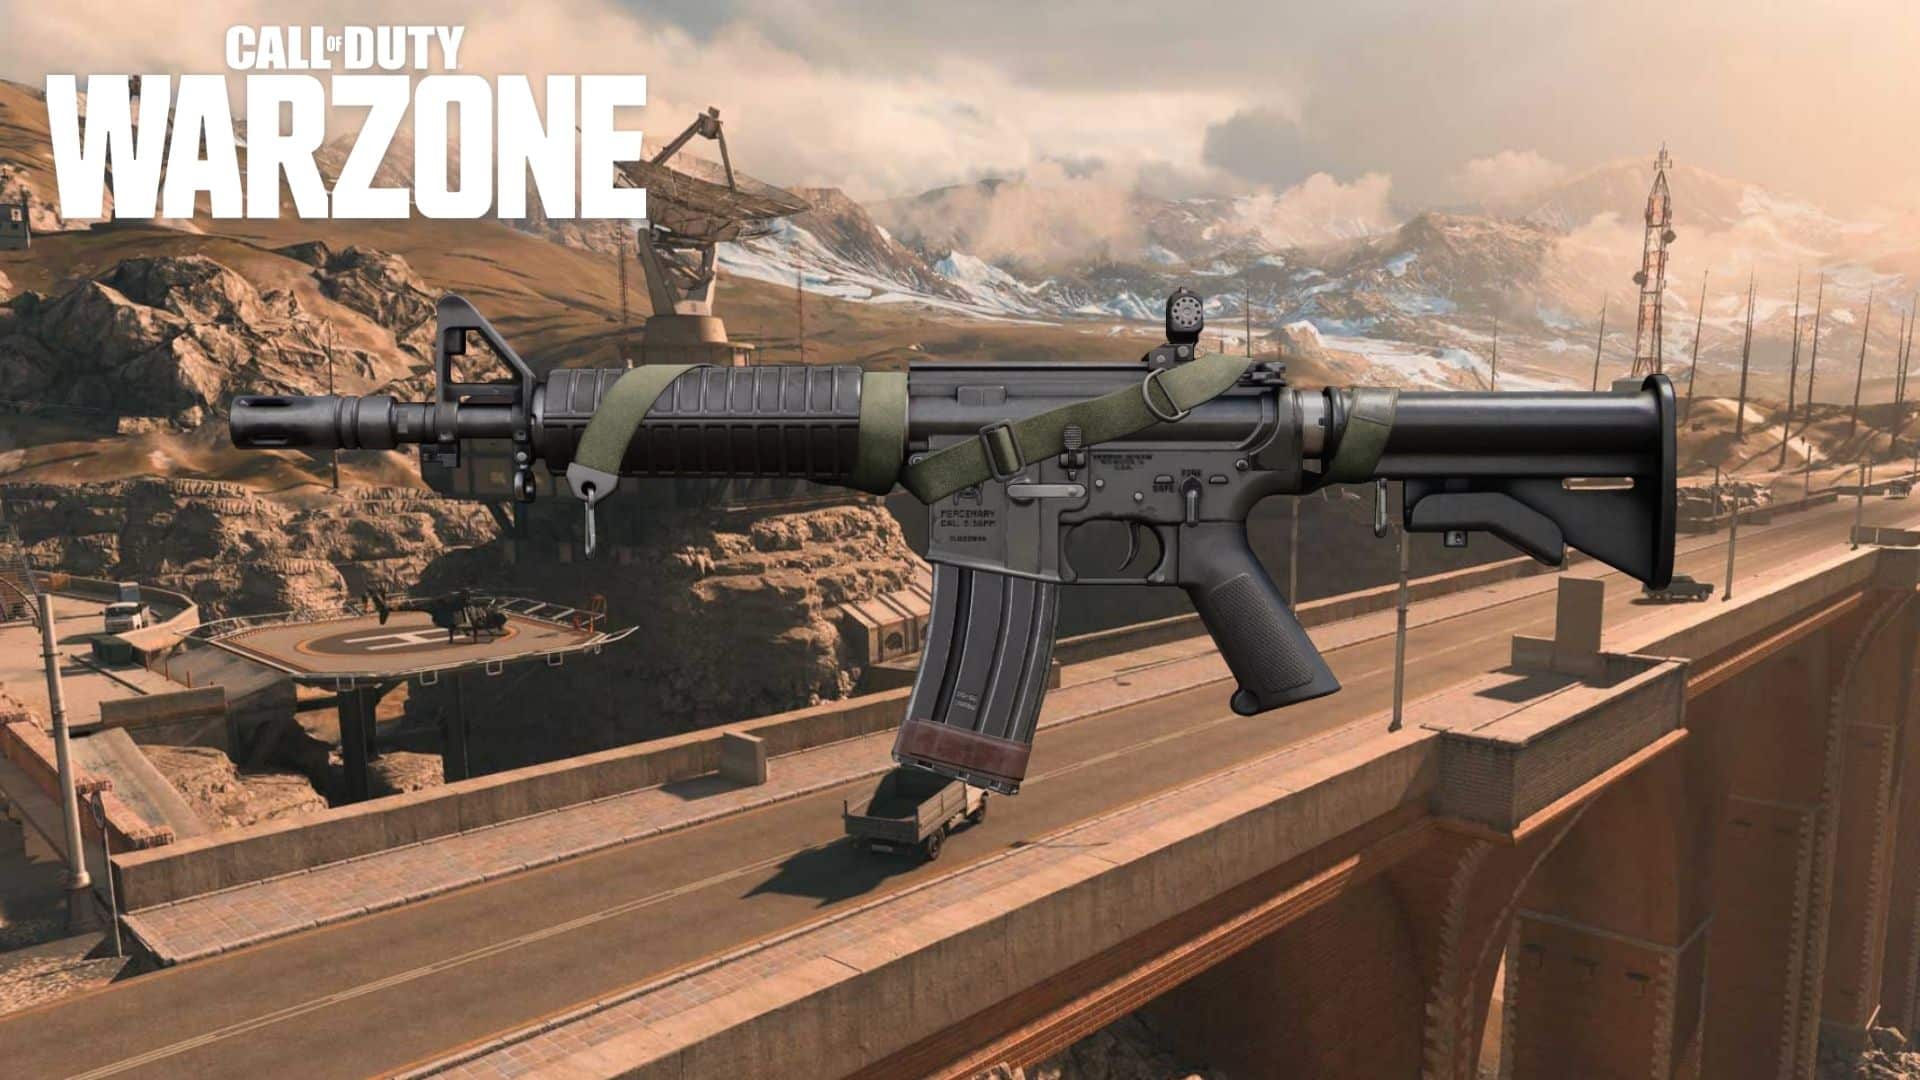 XM4 assault rifle in Warzone